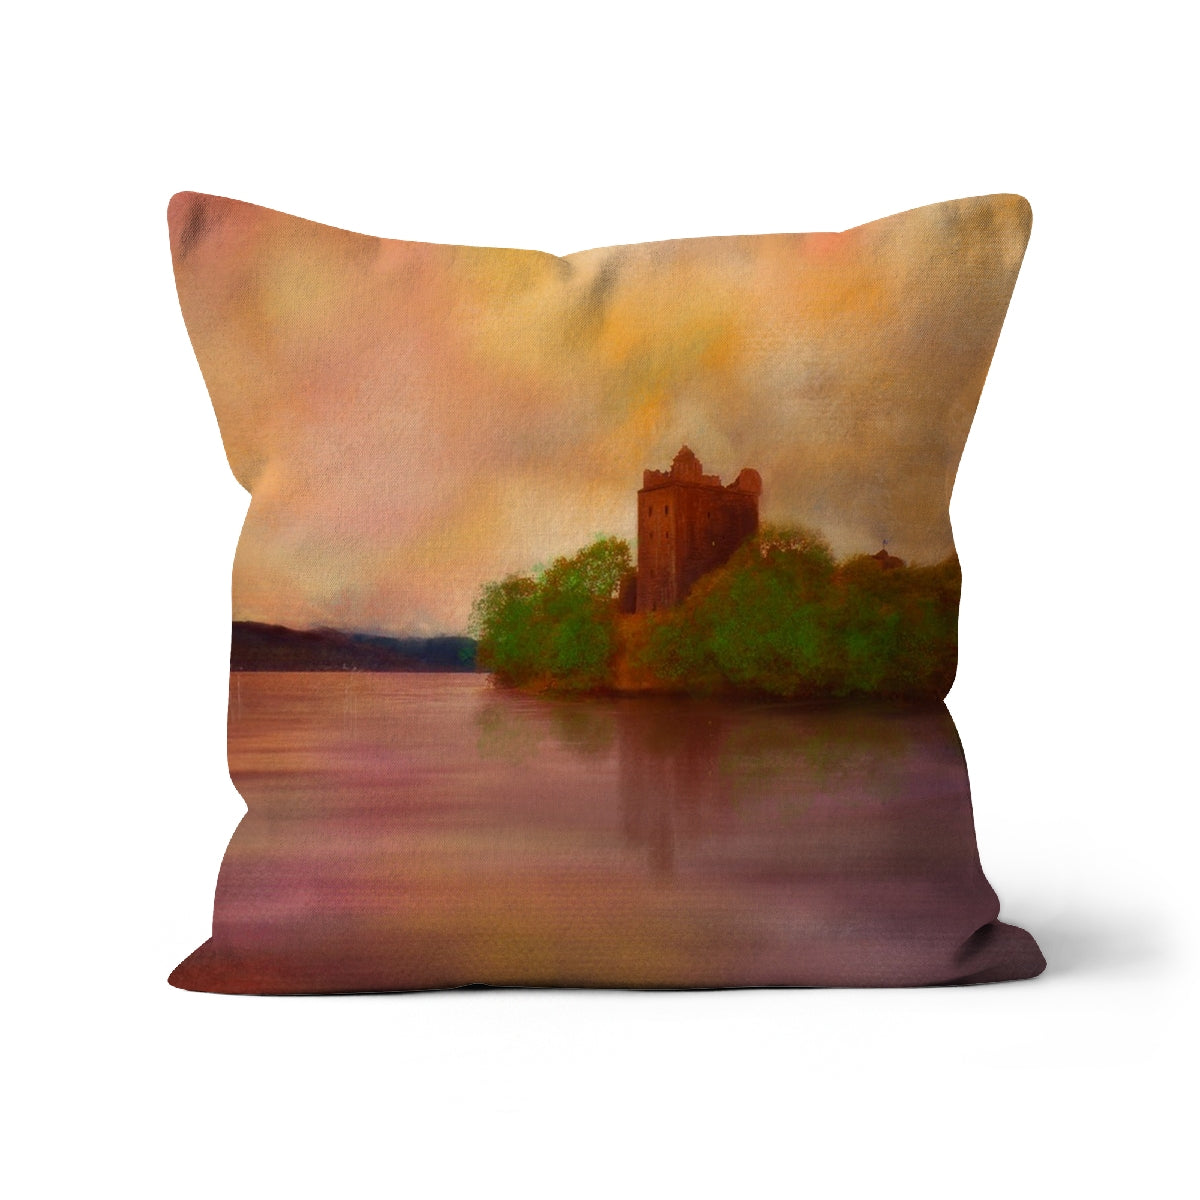 Urquhart Castle Art Gifts Cushion-Cushions-Historic & Iconic Scotland Art Gallery-Linen-16"x16"-Paintings, Prints, Homeware, Art Gifts From Scotland By Scottish Artist Kevin Hunter